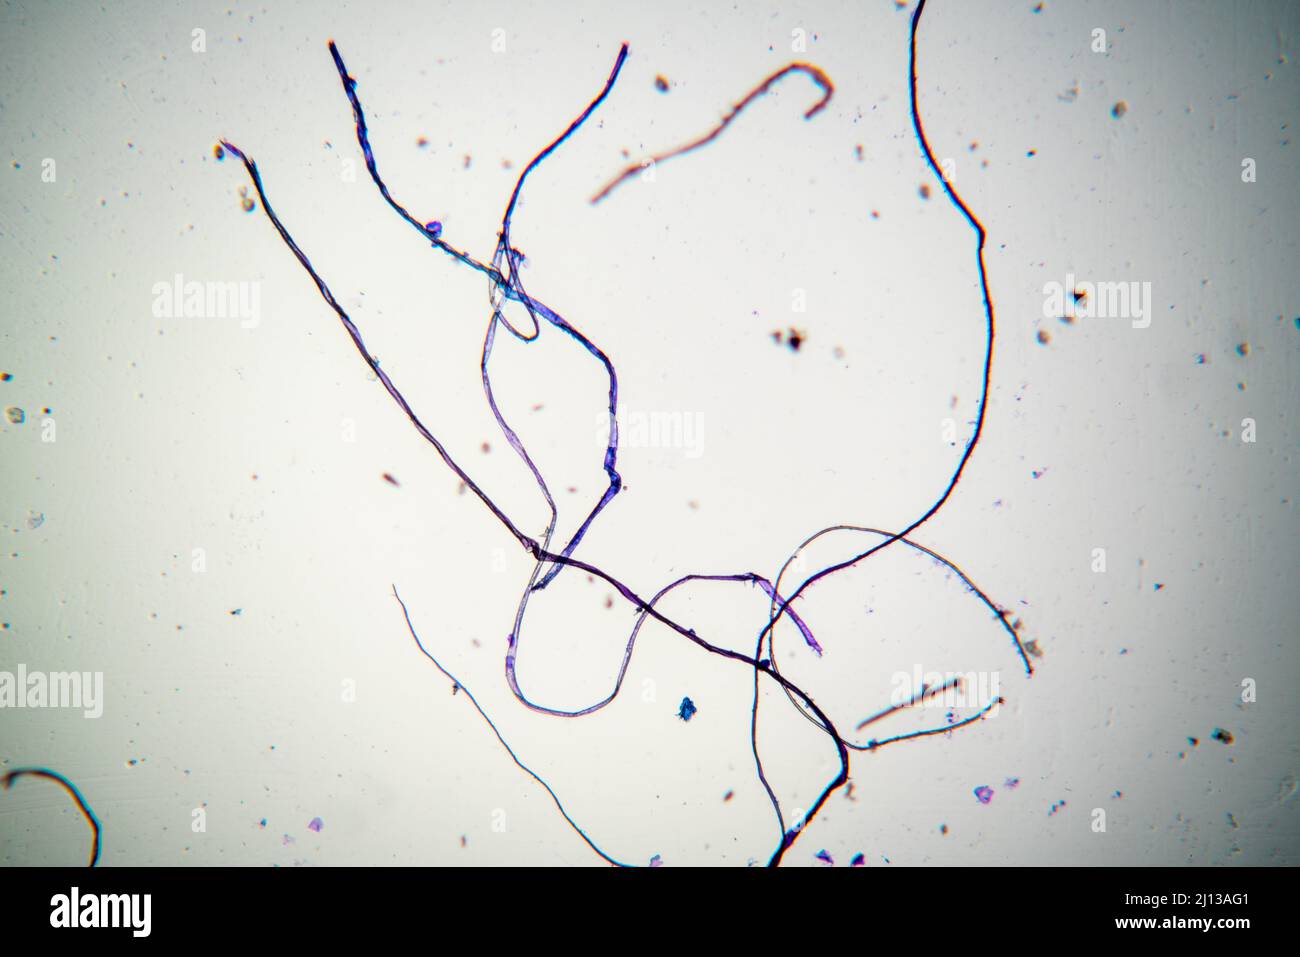 Tissue fibers from the crime scene under a microscope. Physical evidence of the offender's identity crime proof Stock Photo